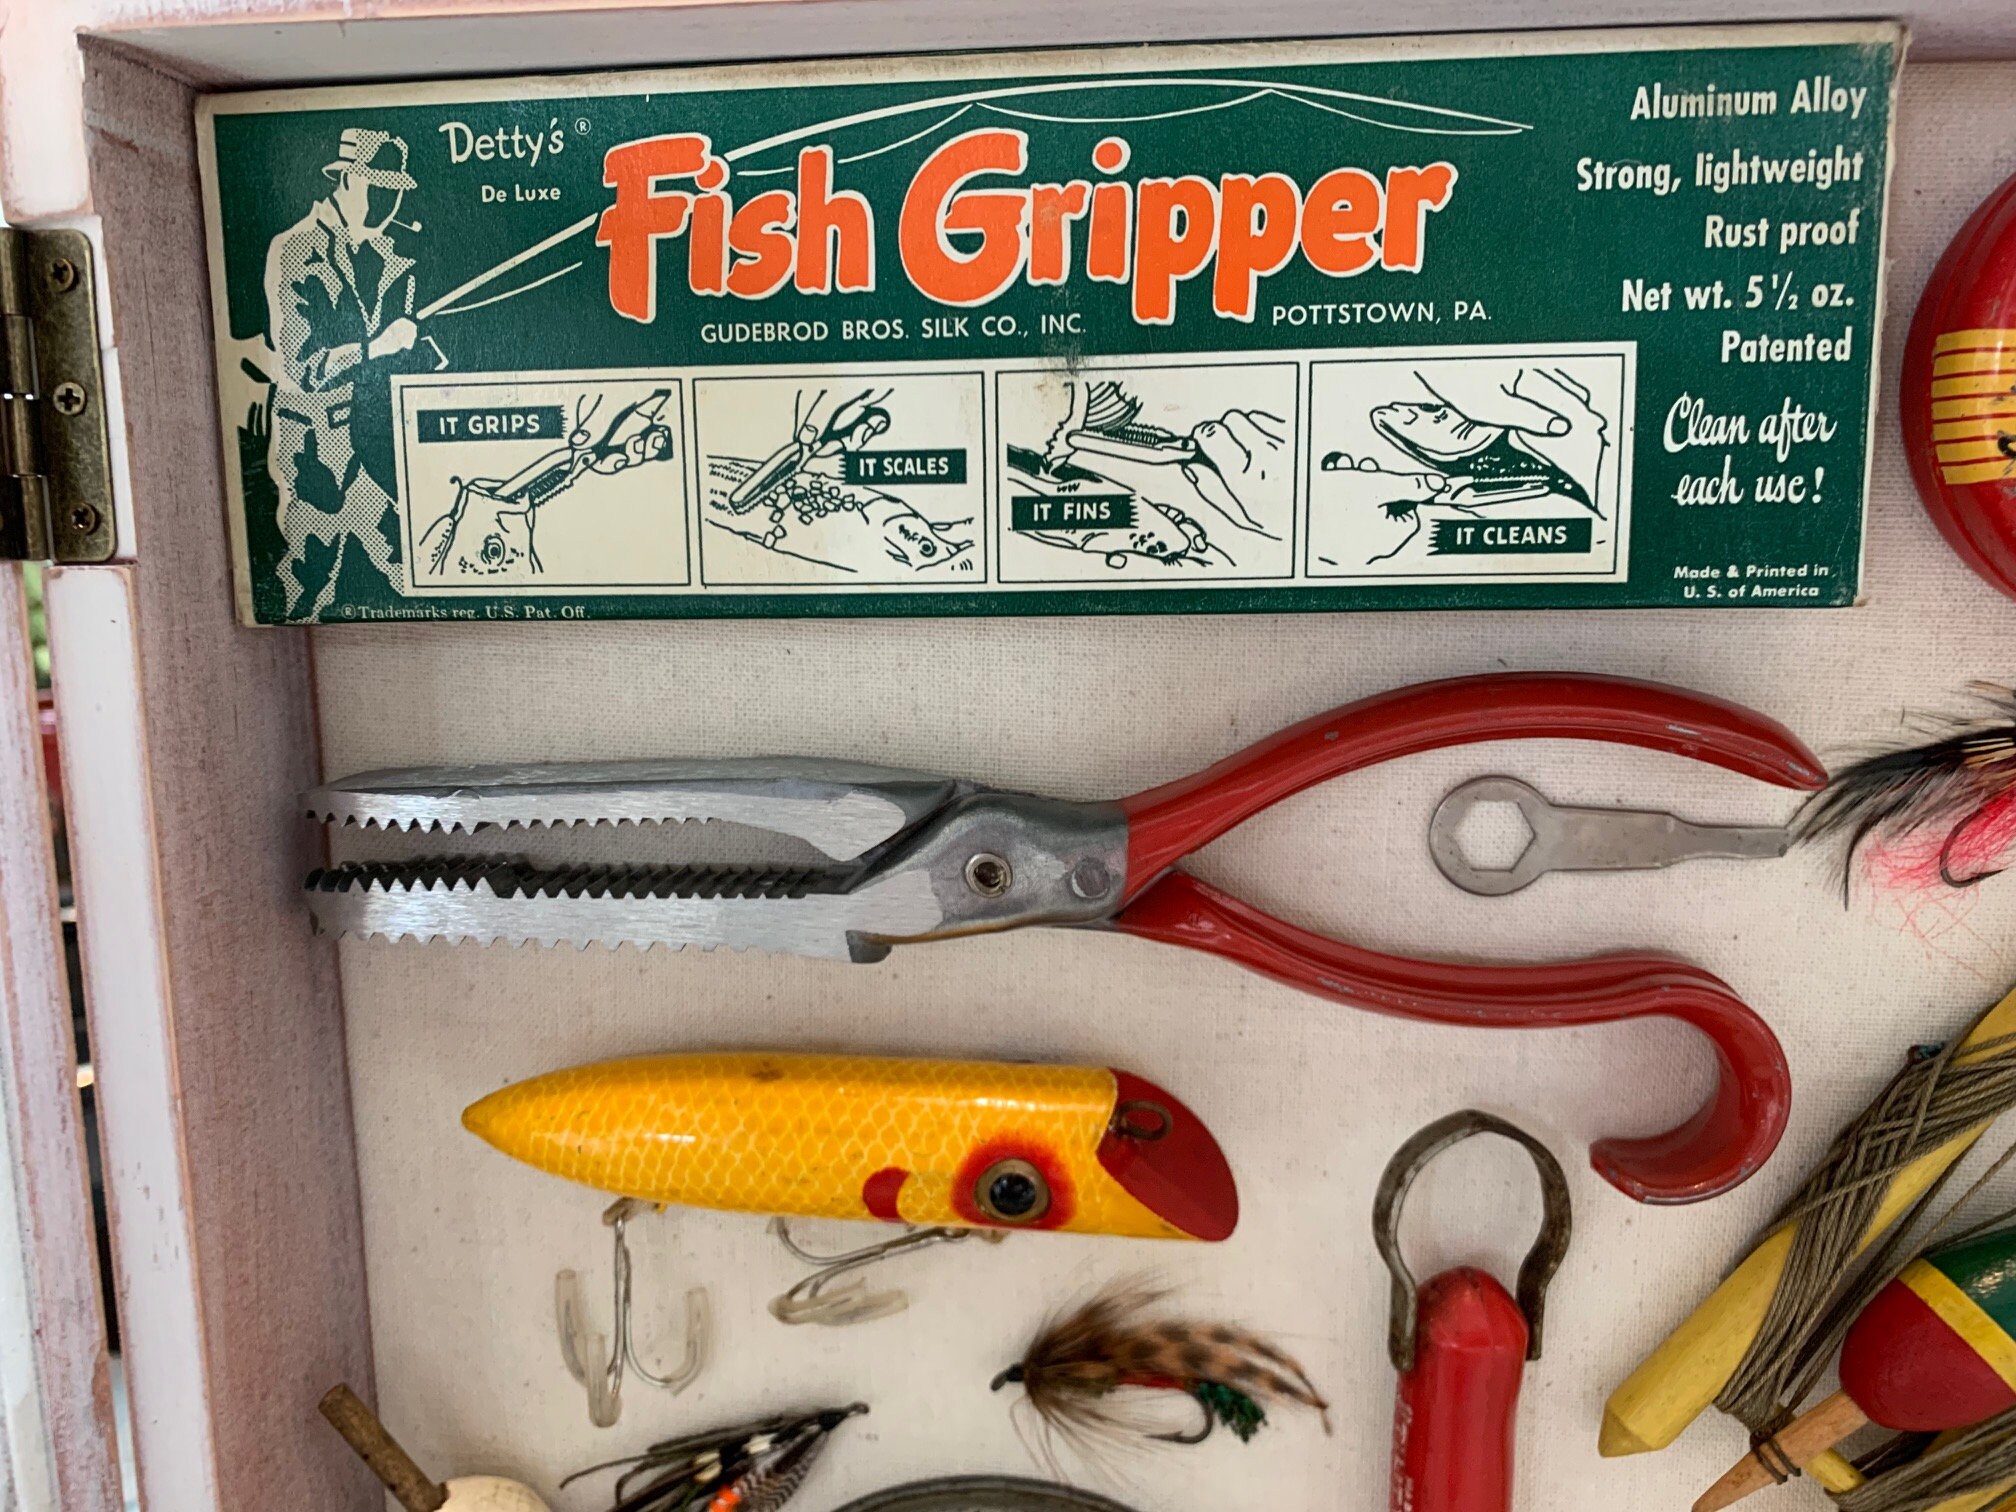 Detty's Fish Gripper tool - it grips, scales, fins & cleans